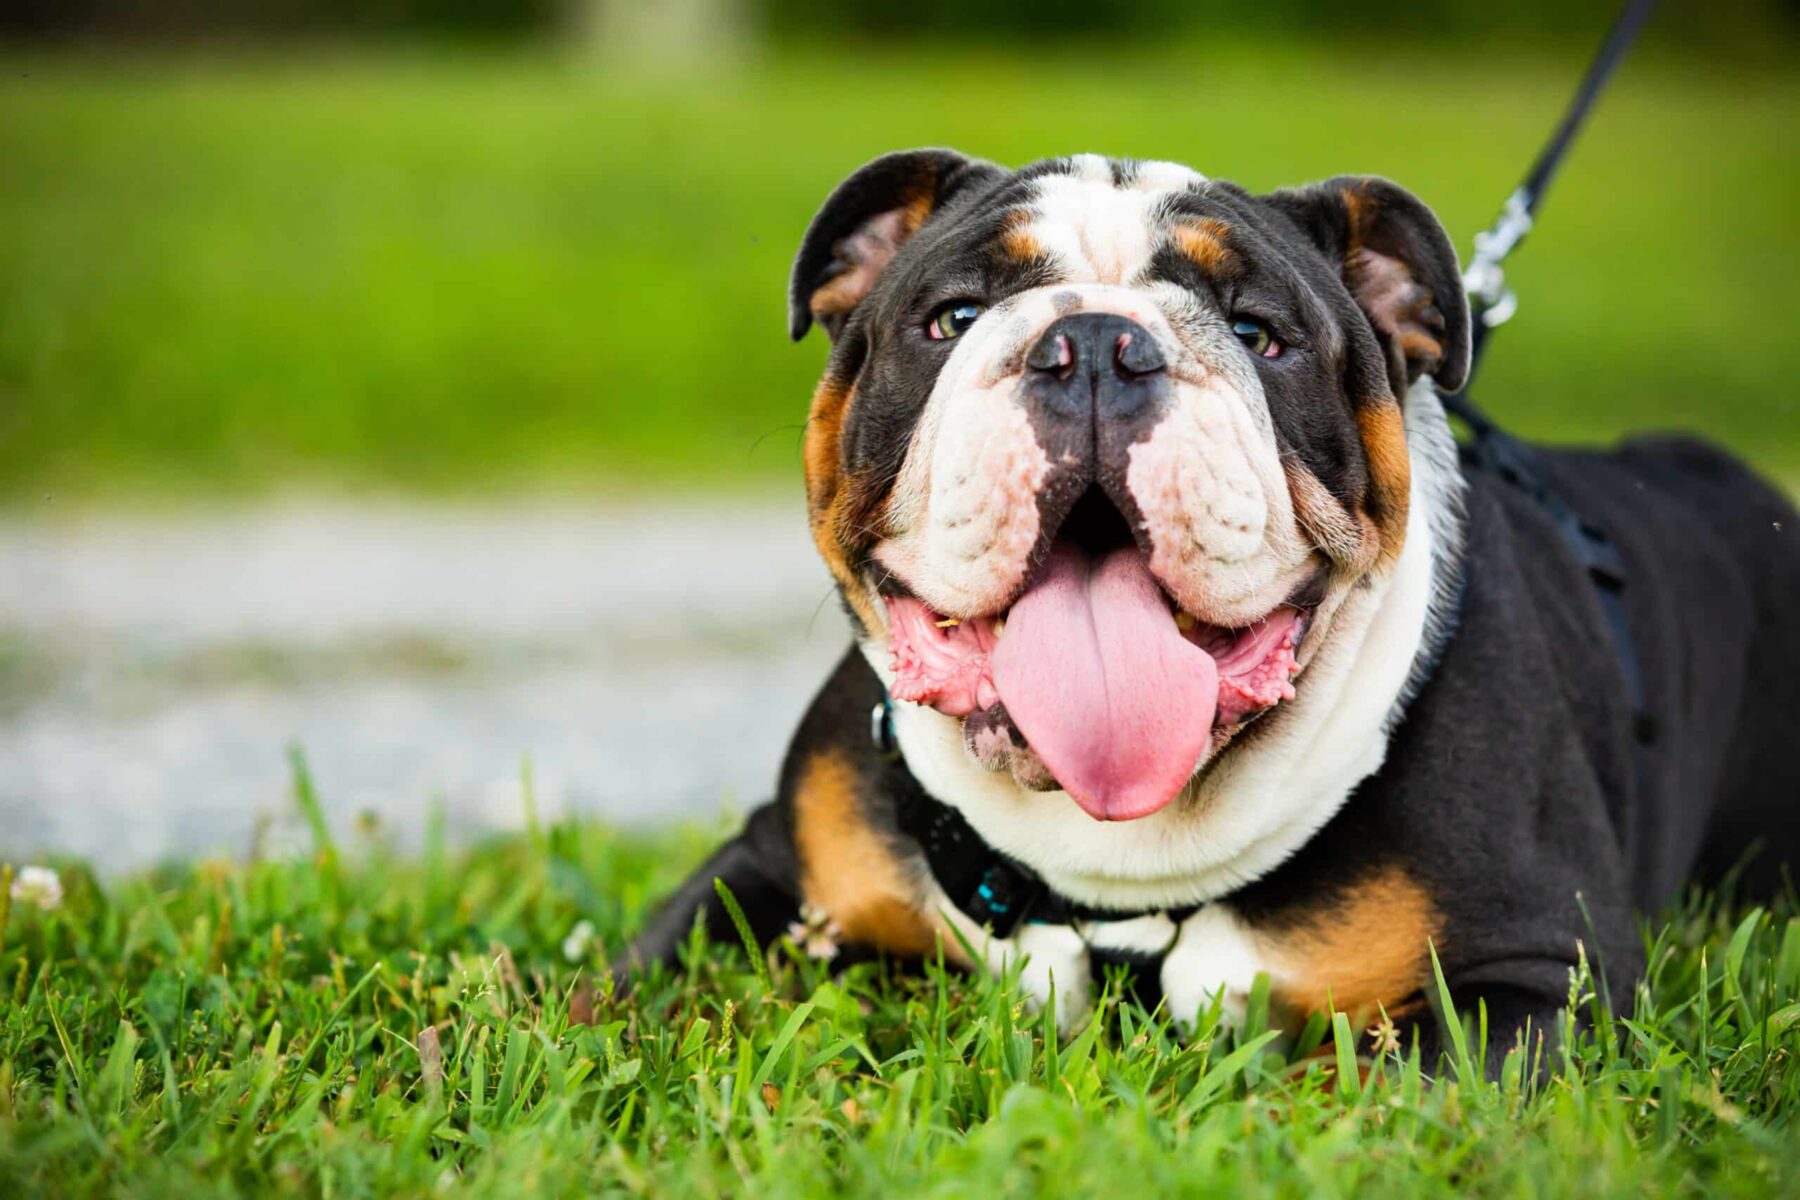 One wrinkled happy English Bulldog laying in grass wearing leash smiles with tongue out looking at camera